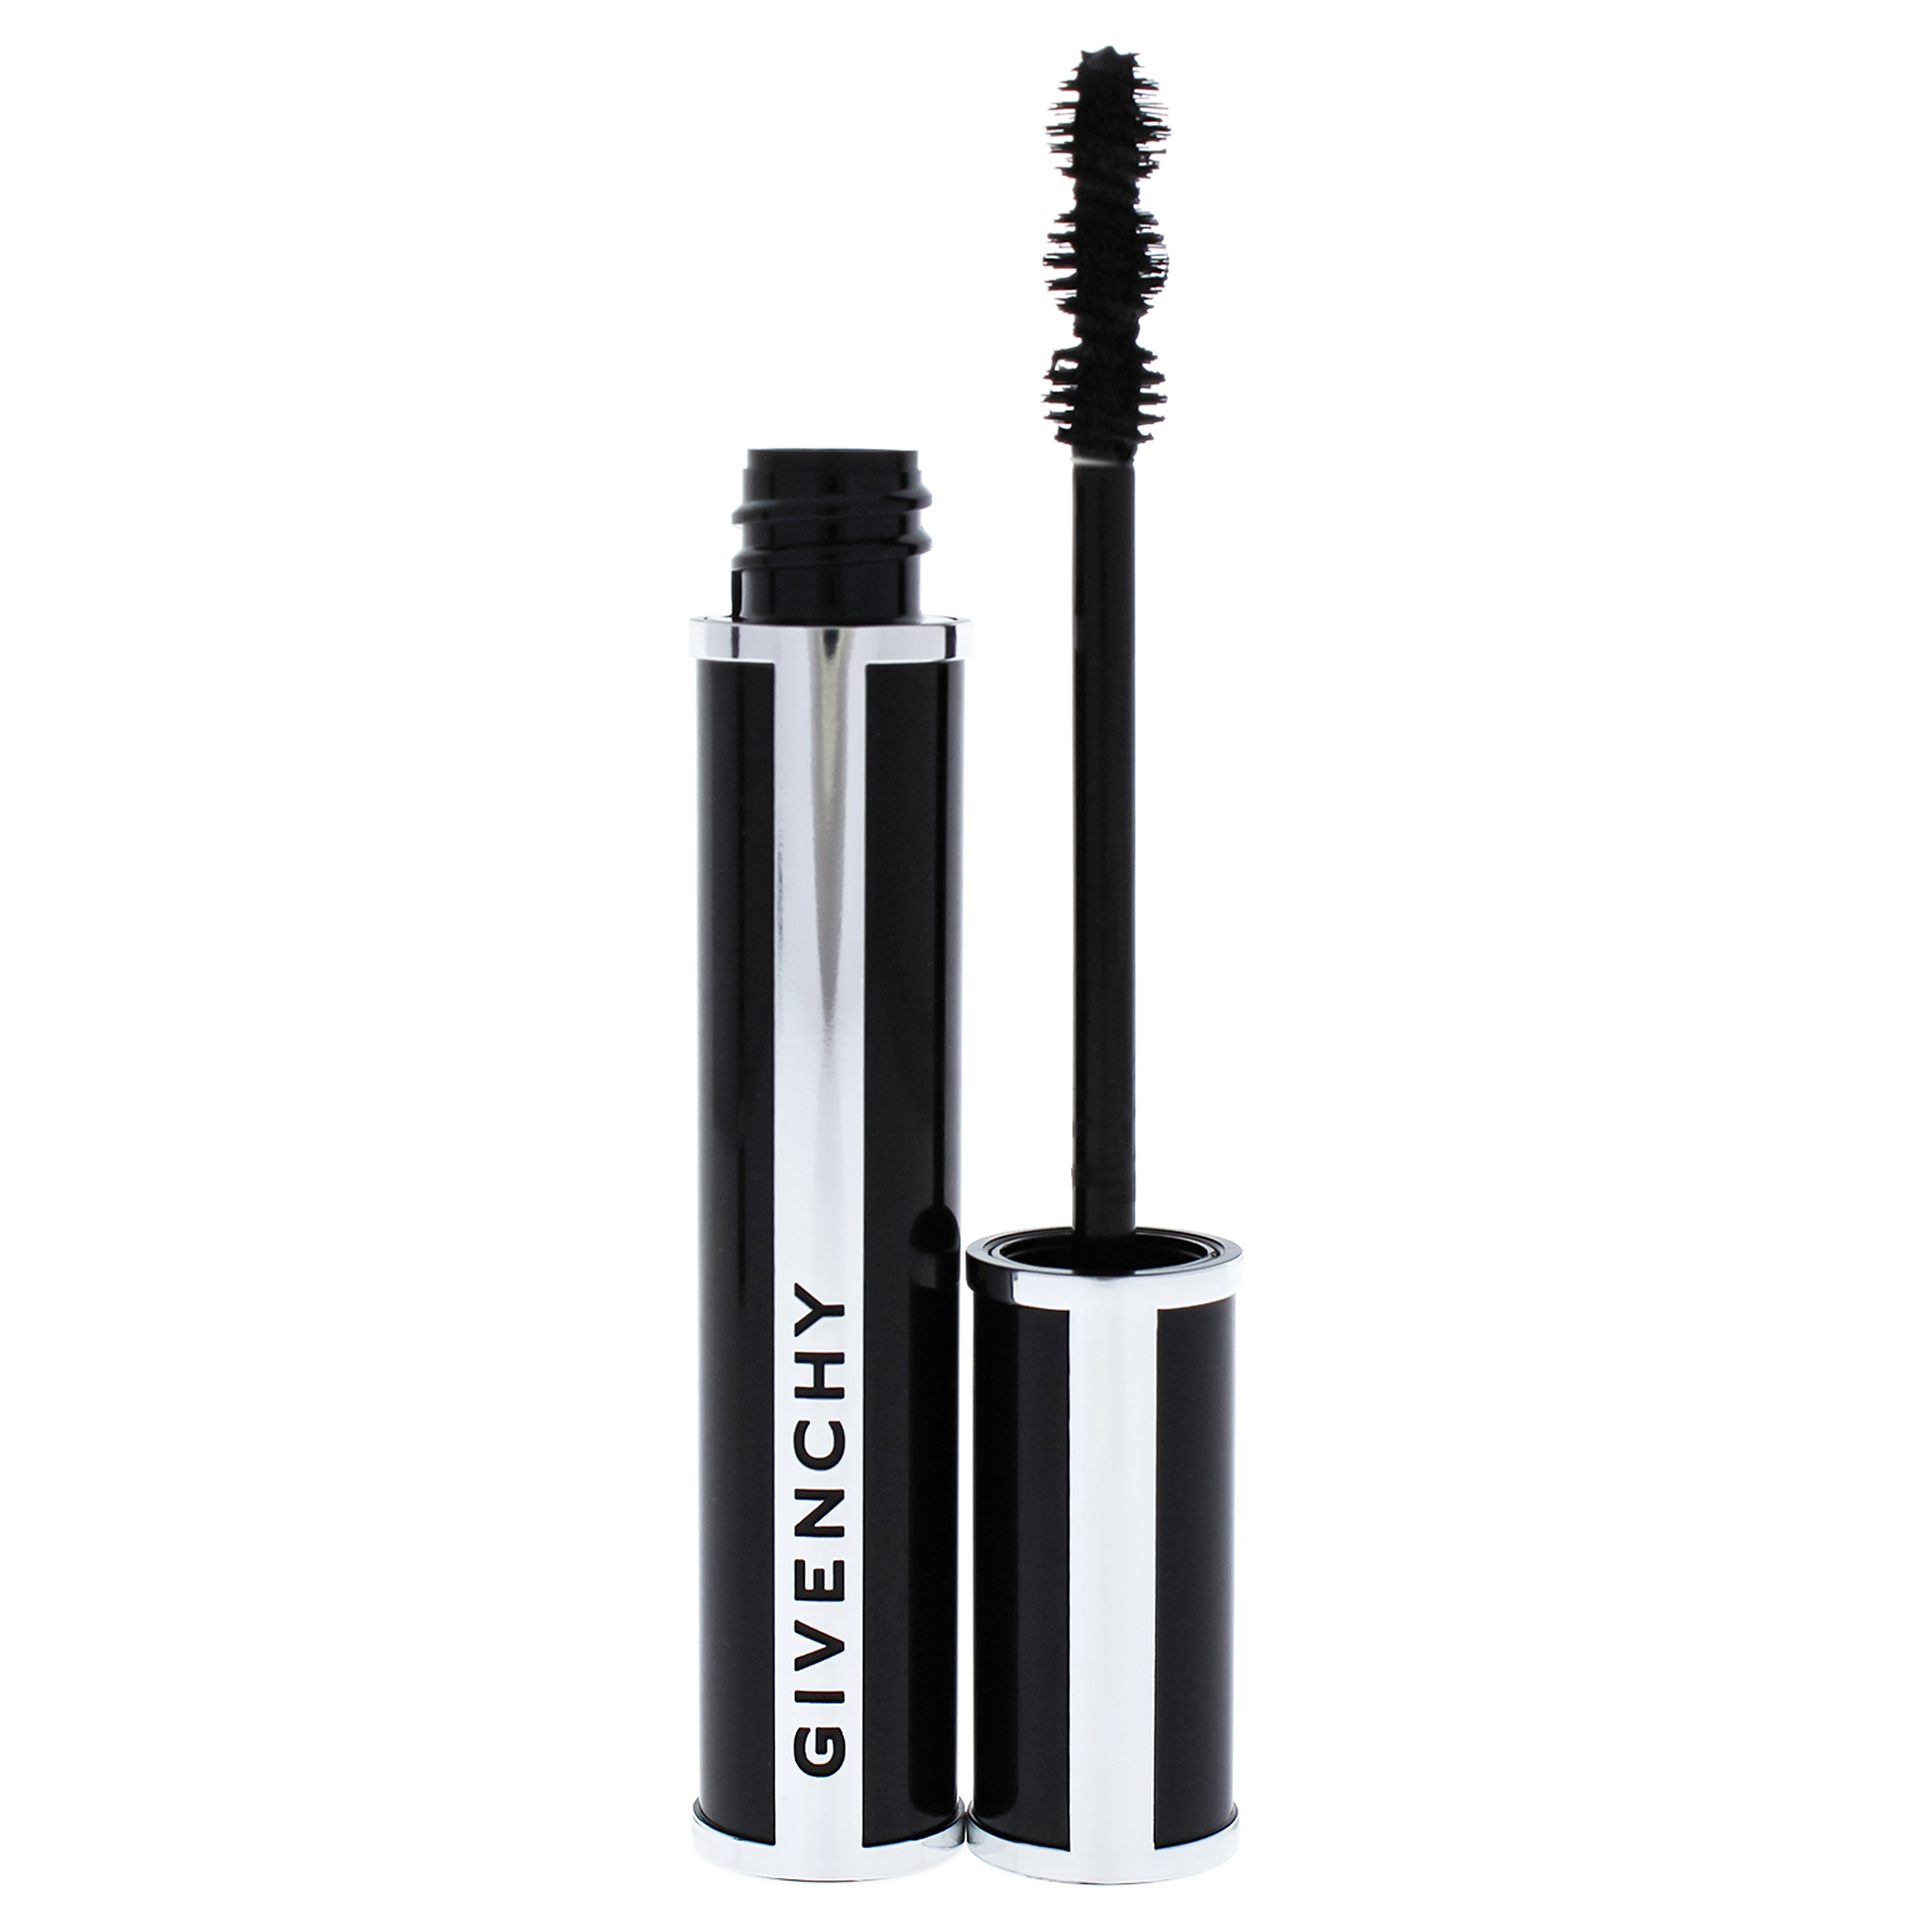 Noir Couture 4 In 1 Mascara - 1 Black Satin by Givenchy for Women - 0.28 oz Mascara - image 2 of 2